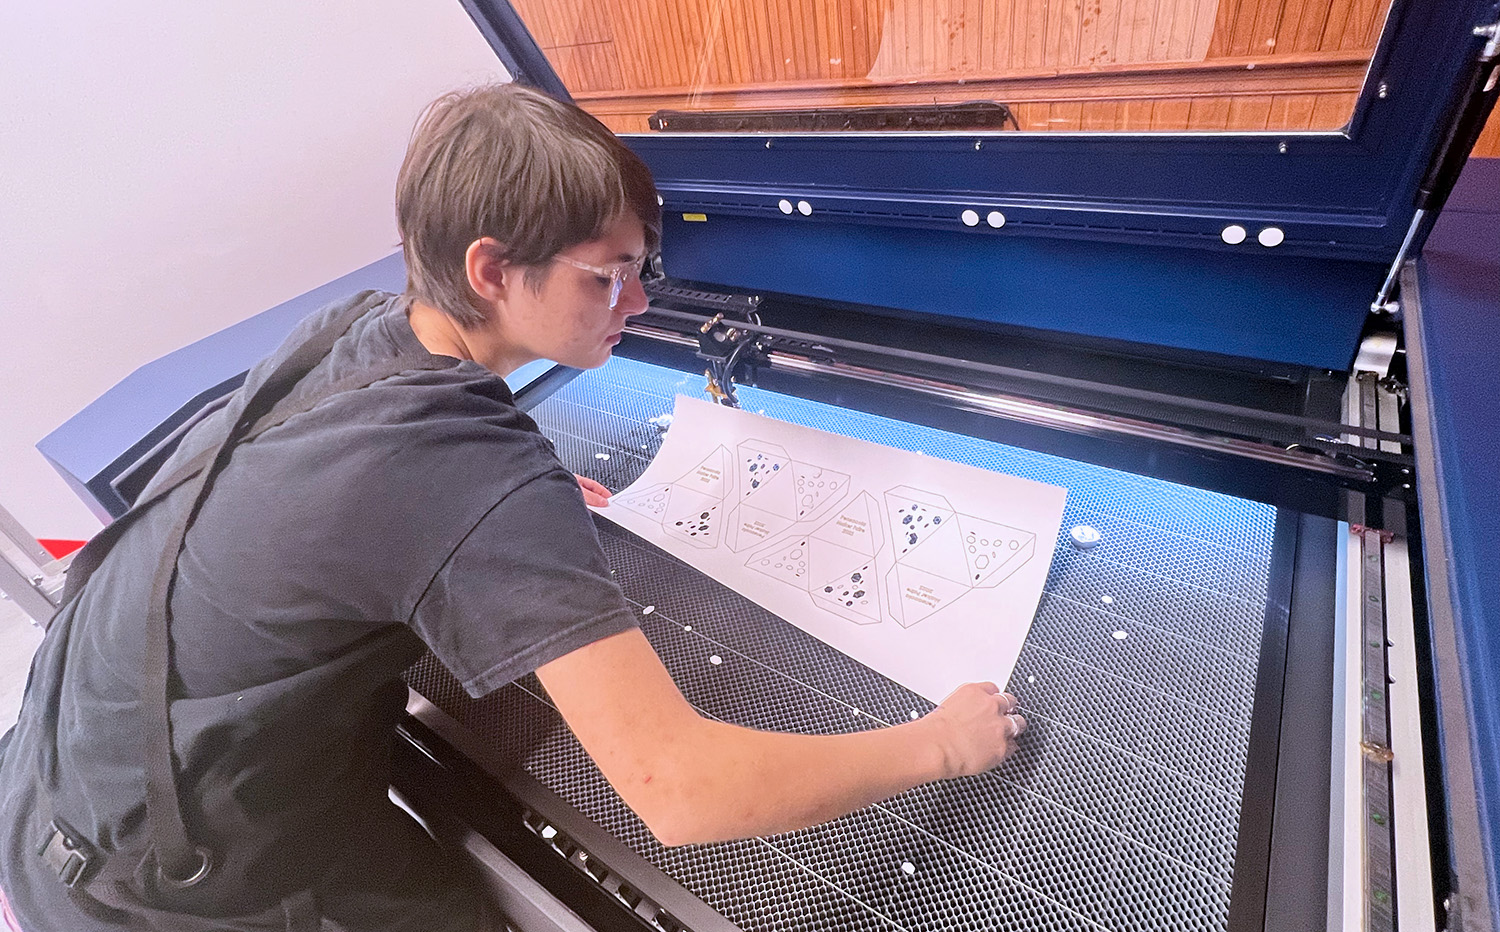 A student is laser cutting paper using machinery.